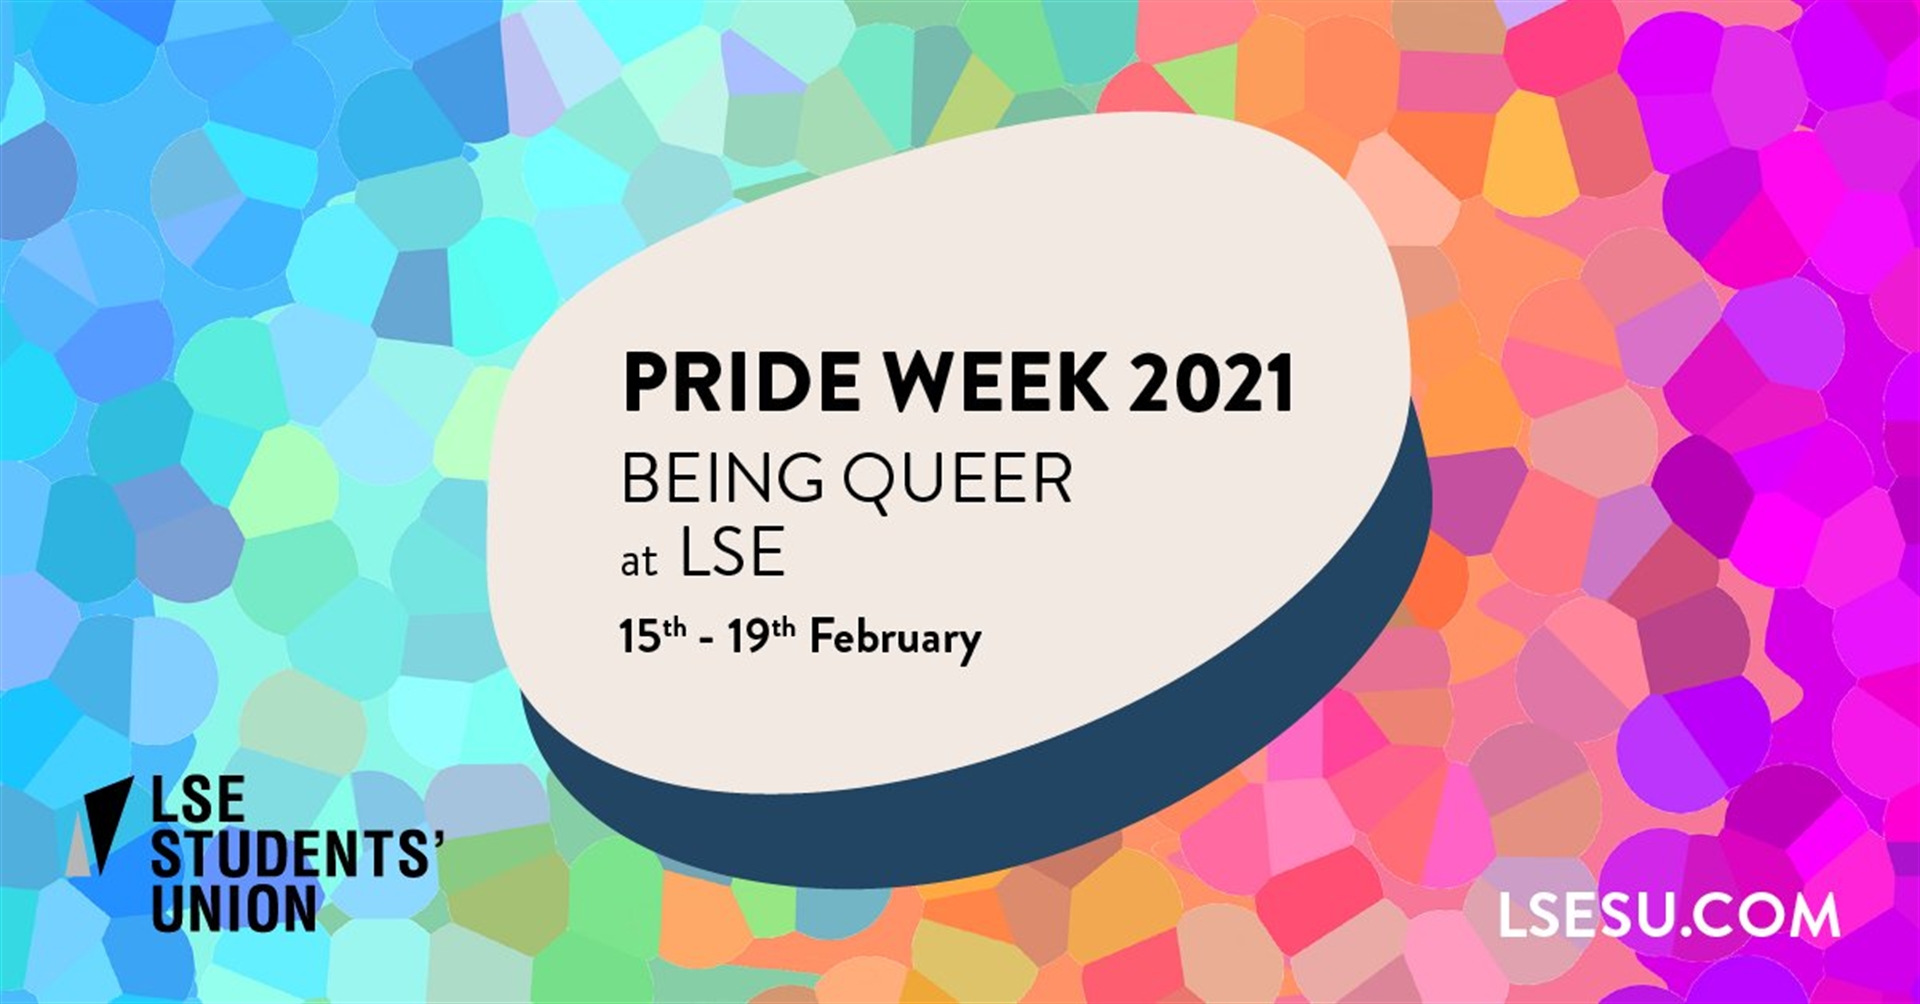 We have a series of events lined up for Pride Week 2021!